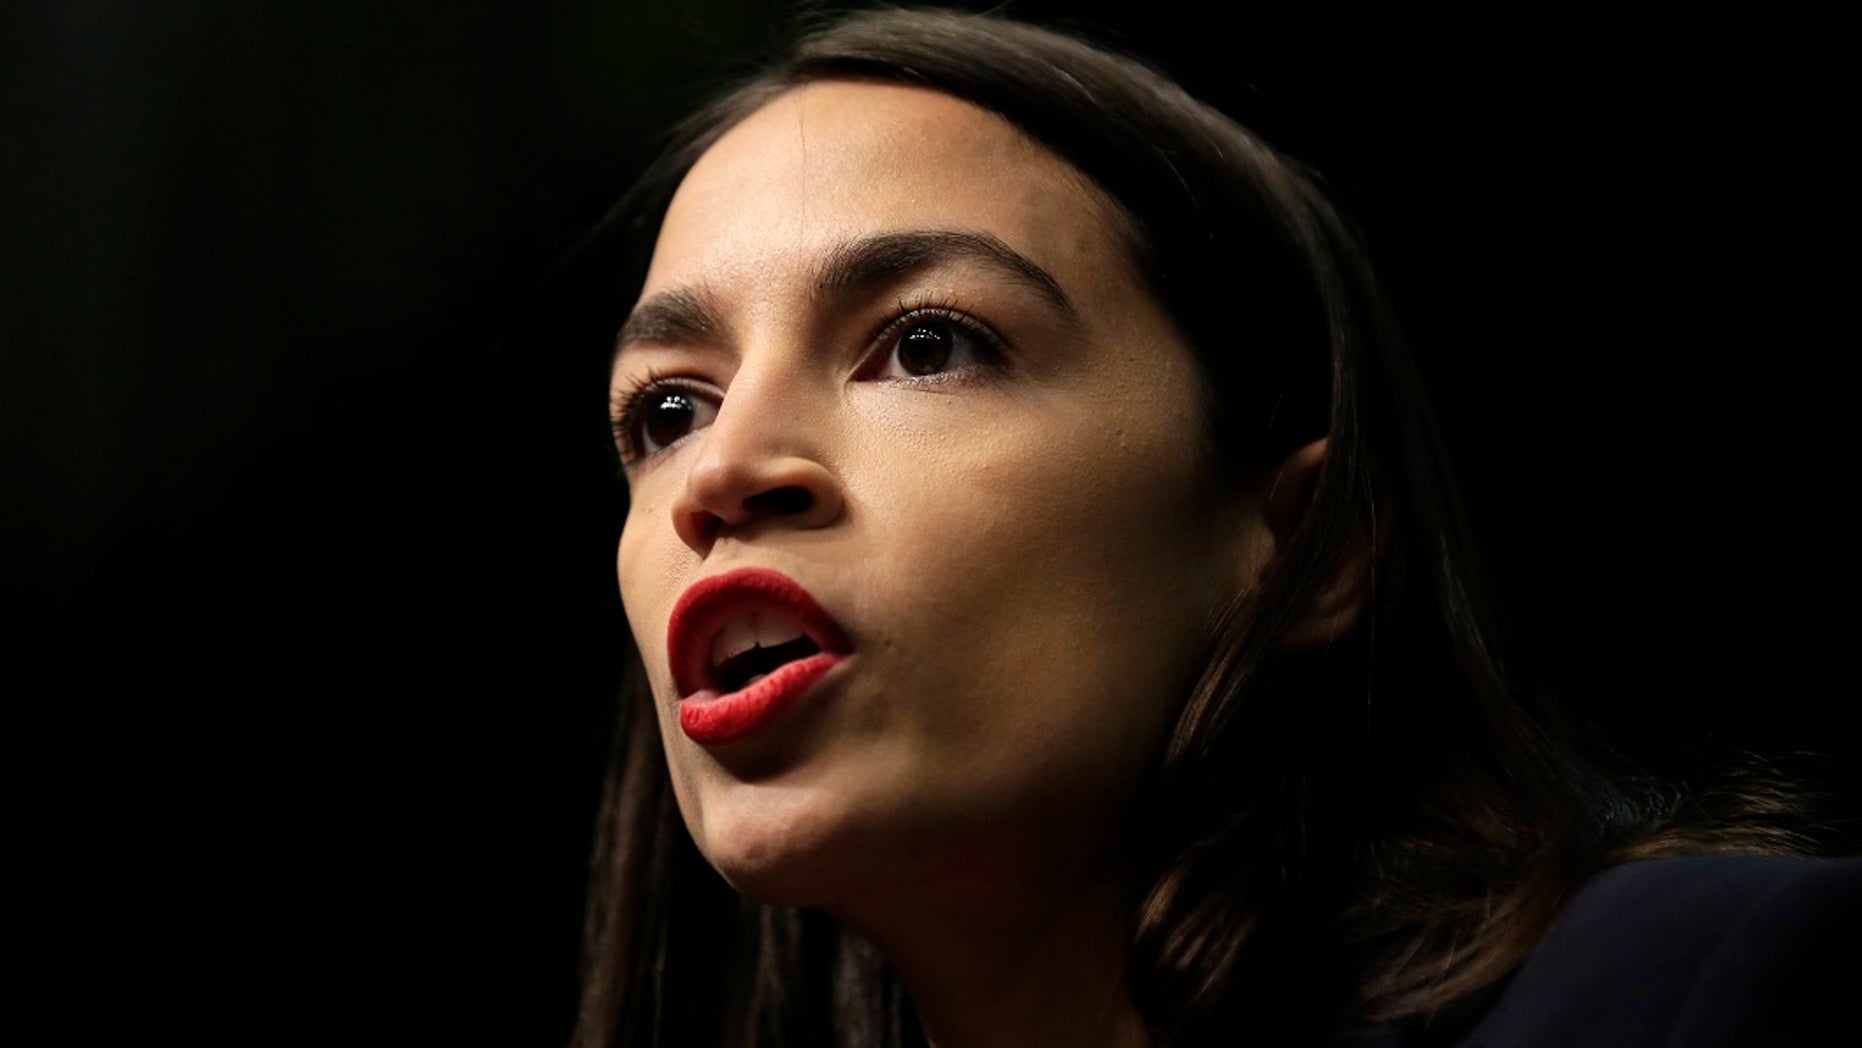 Rep. Alexandria Ocasio-Cortez, D-N.Y., Speaks at the National Action Network convention in New York on Friday, April 5, 2019. (Associated Press)